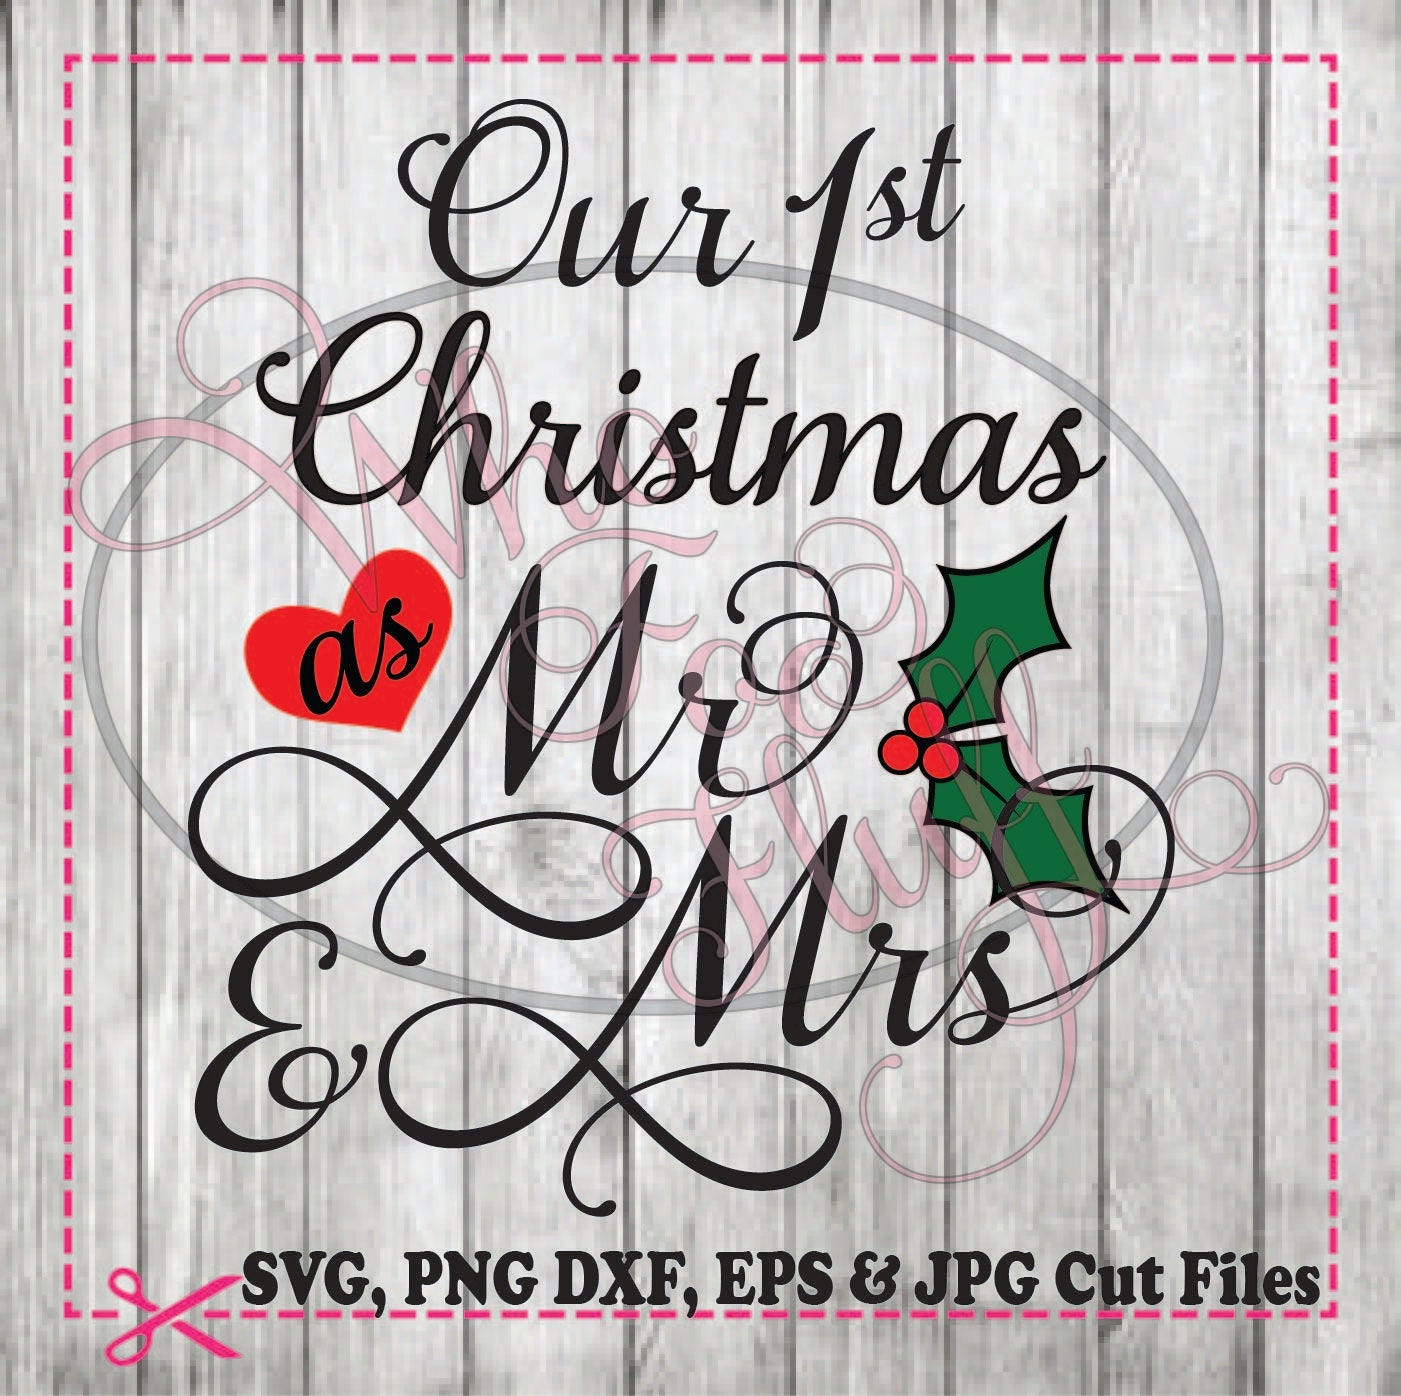 First Christmas as Mr and Mrs 1st Christmas as Mr. & Mrs. svg png jpg dxf eps cutting file cutting file heart die cut vinyl anniversary